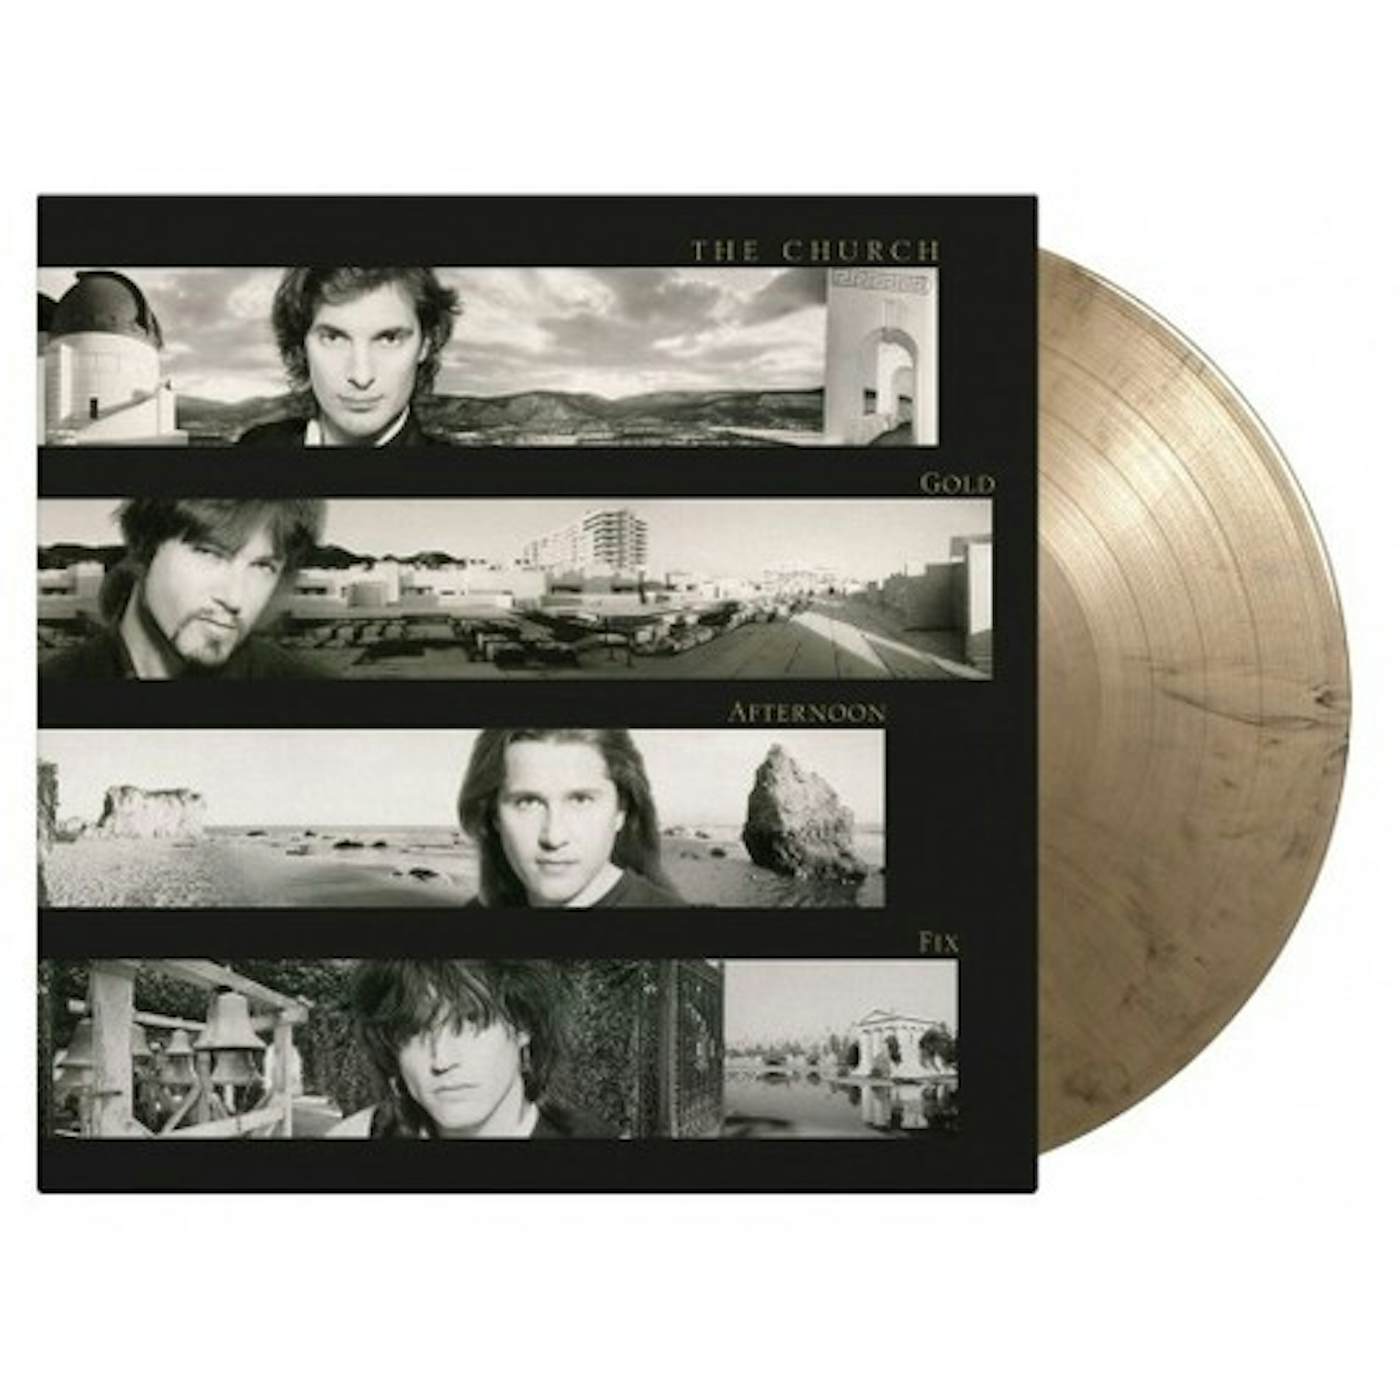 The Church Gold Afternoon Fix Vinyl Record